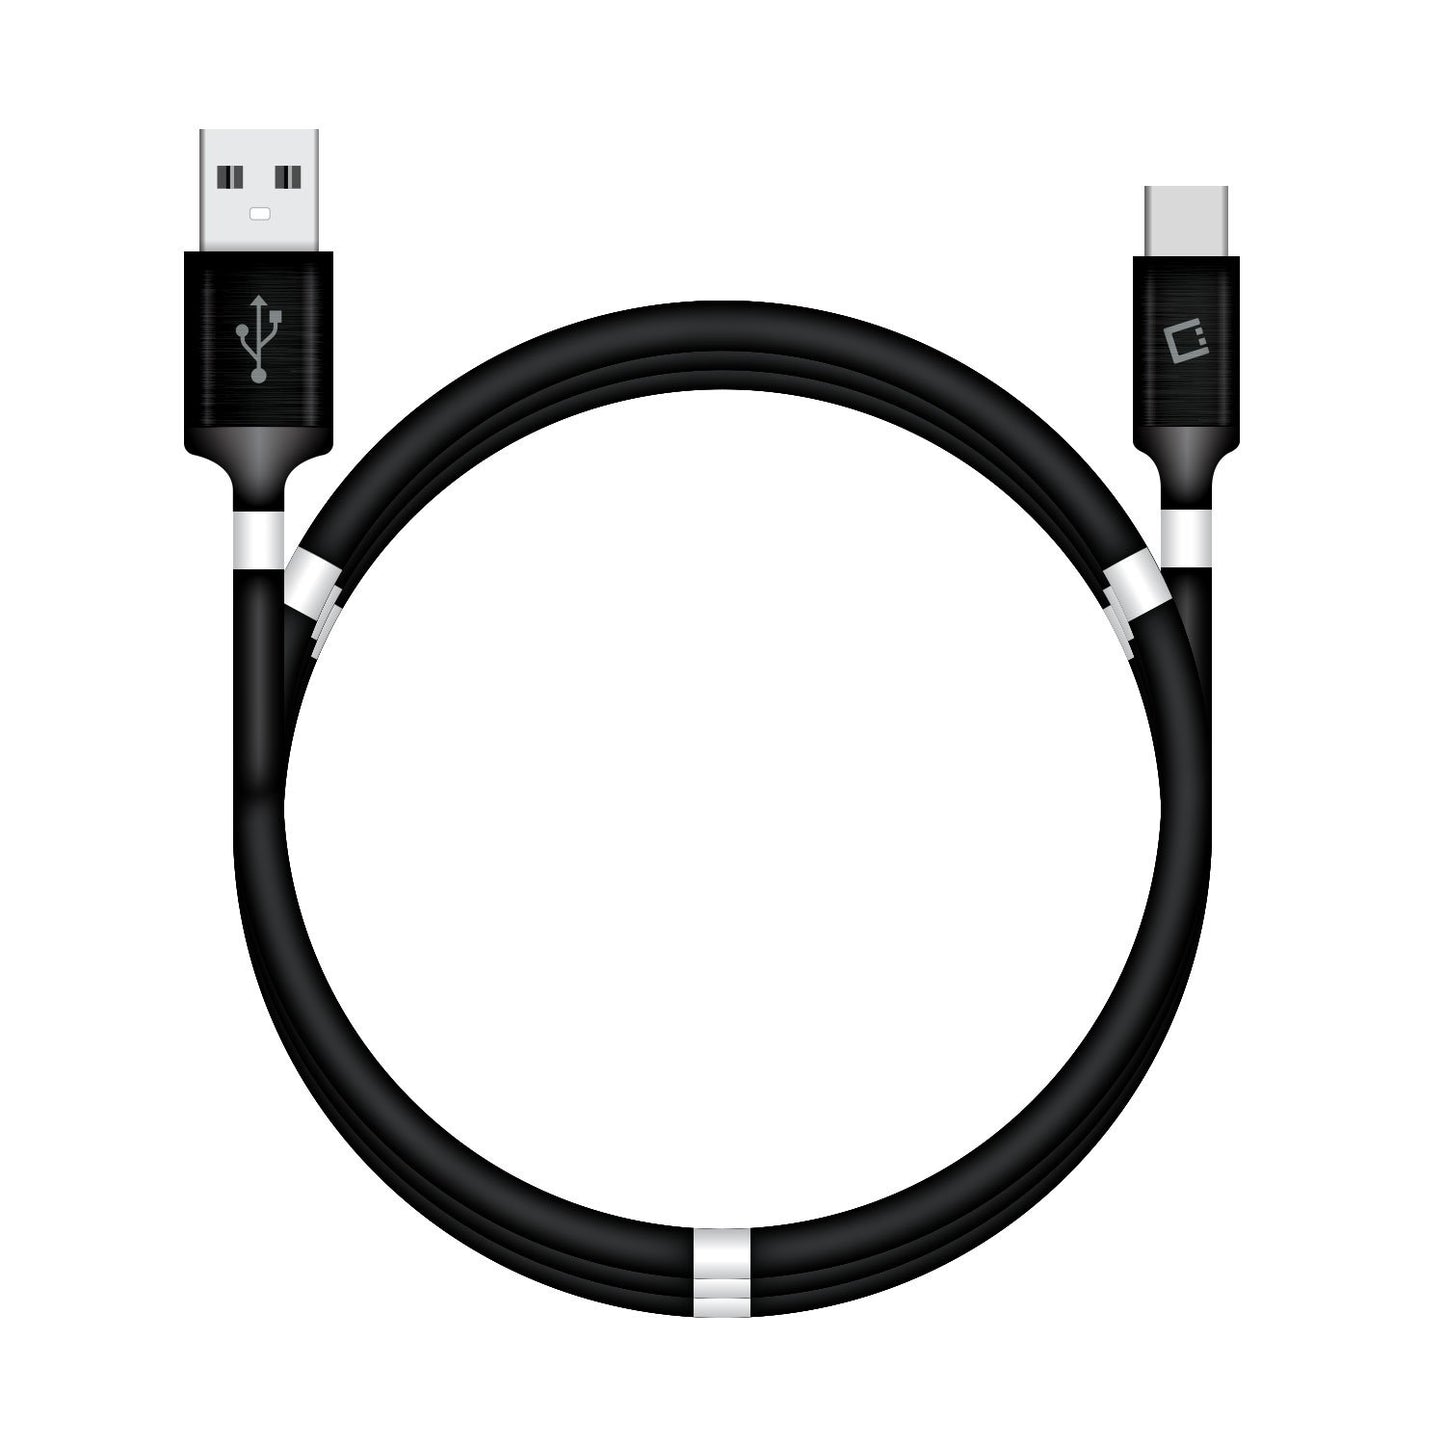 DCACOIL3BK- USB-C Charging Cable, Magnetic Self Winding, Tangle Free, USB-C to USB-A Charging and Data Cord- 3.3ft. (1m) Black